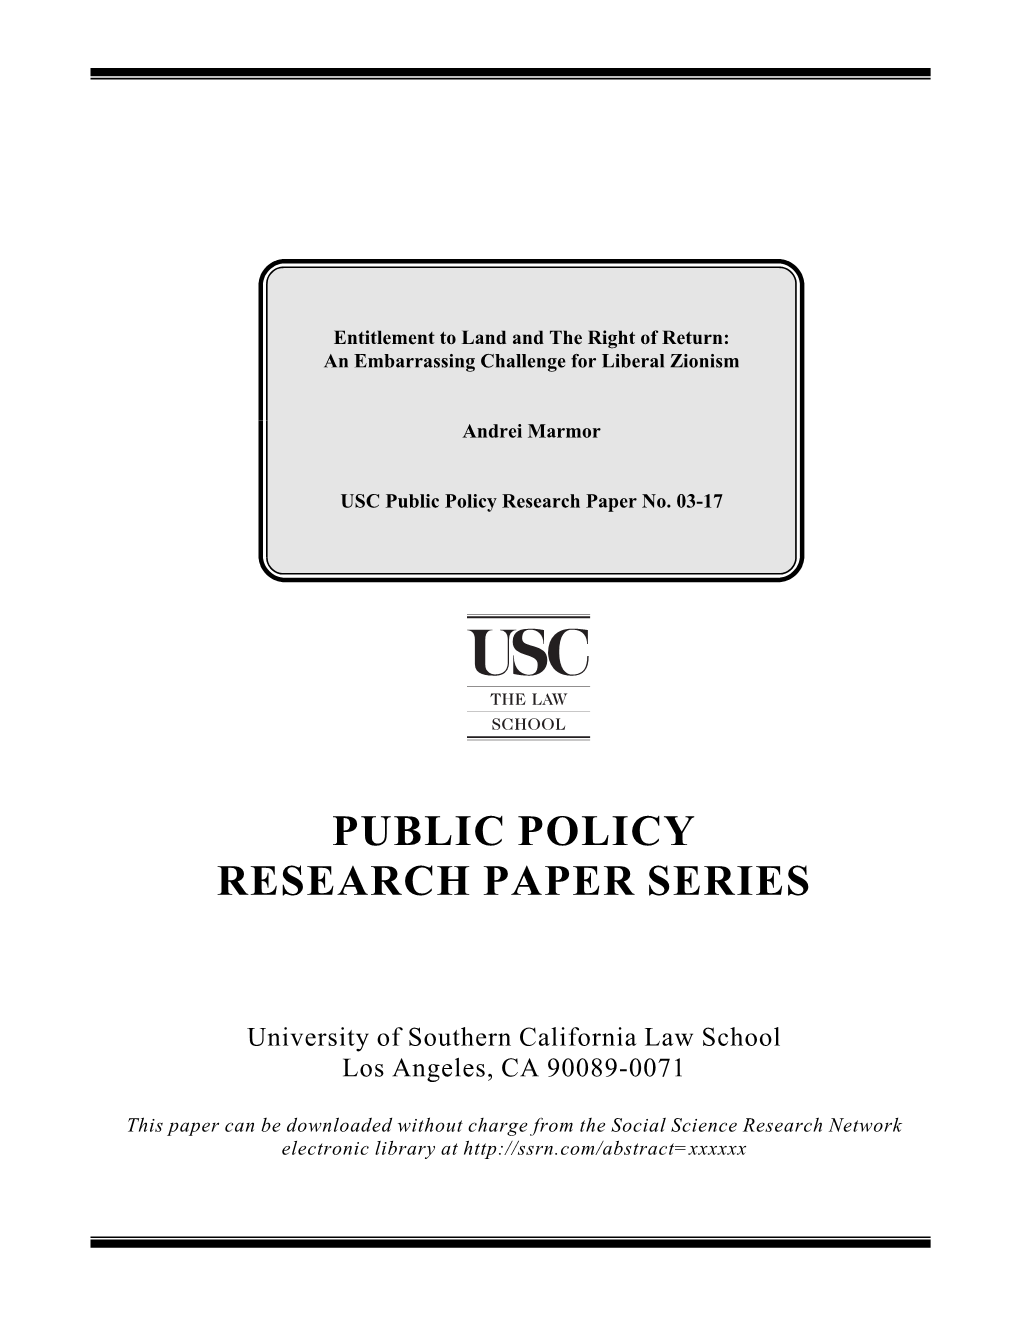 Public Policy Research Paper Series